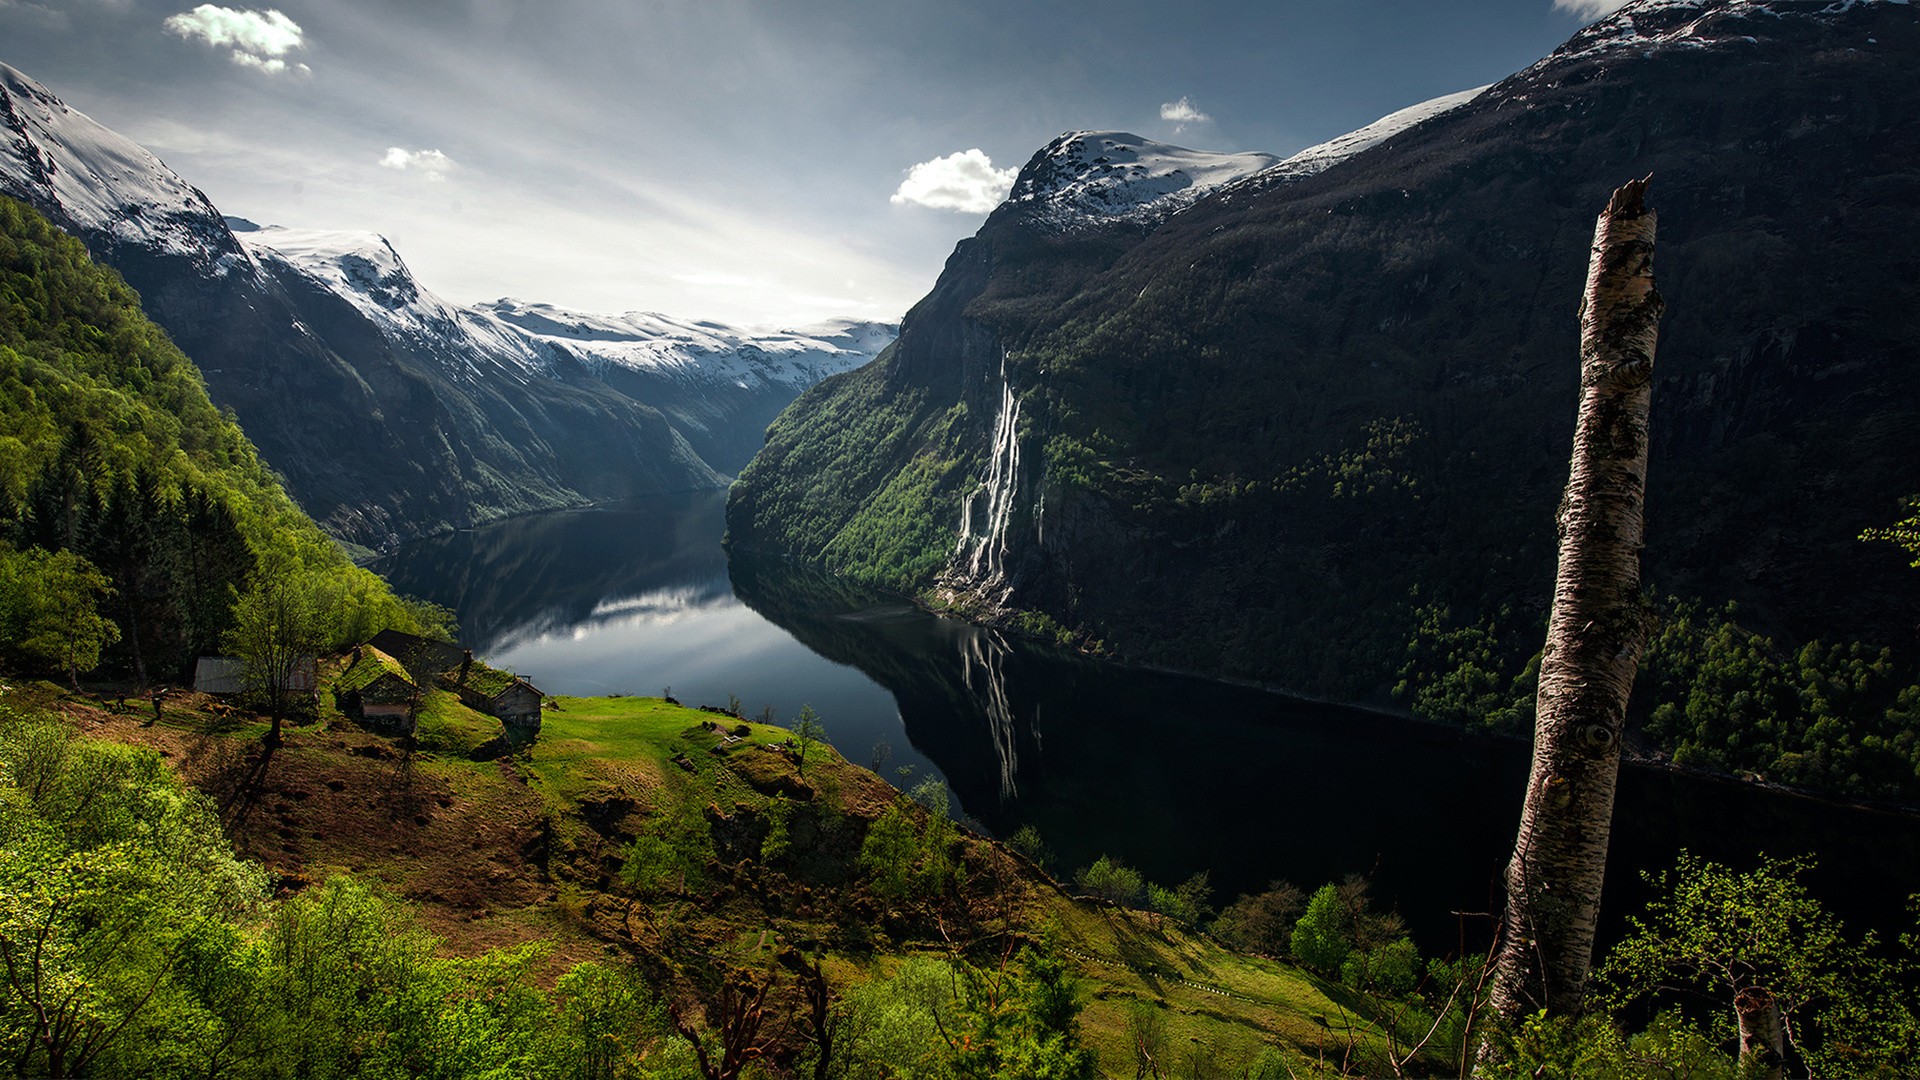 General 1920x1080 landscape mountains nature water fjord trees forest Norway snowy peak house wood clouds hills Geirangerfjord Geiranger